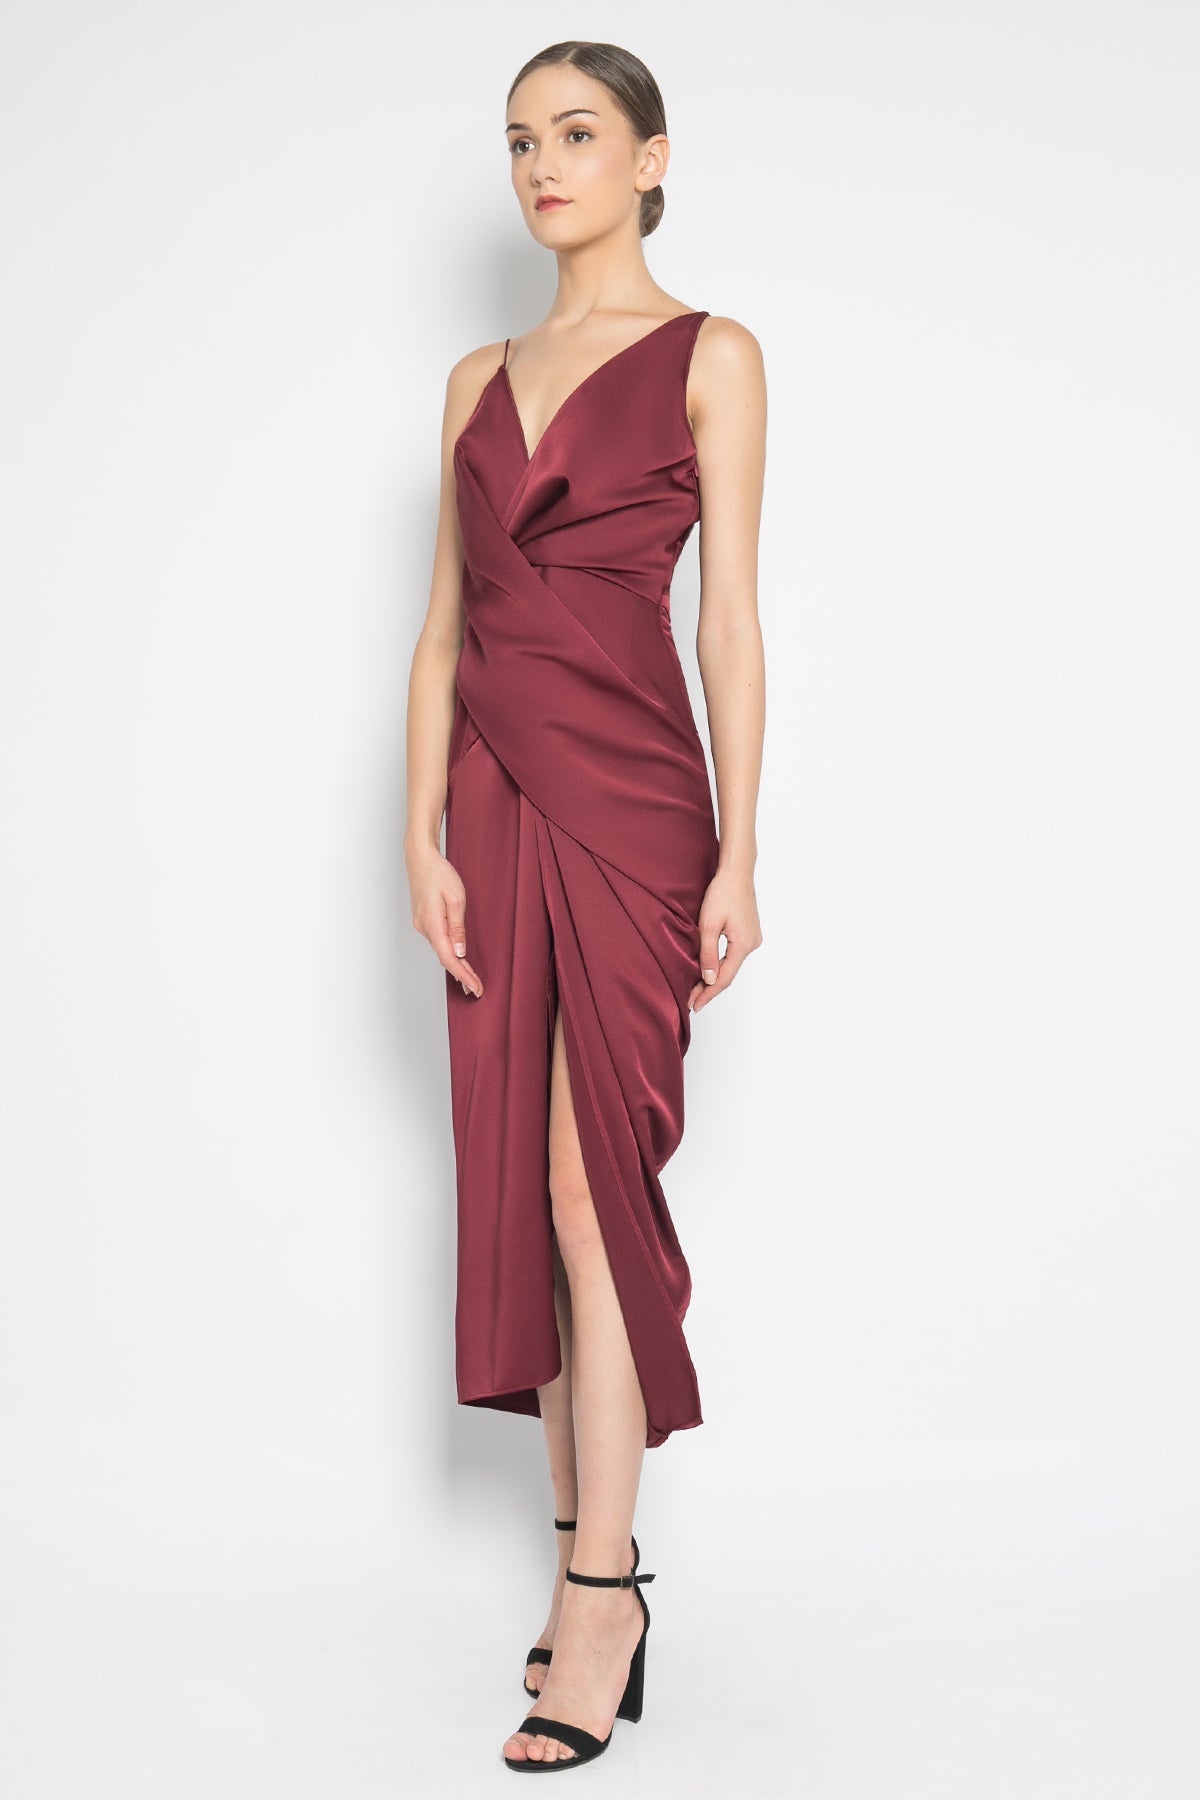 Matisson Dress in Red